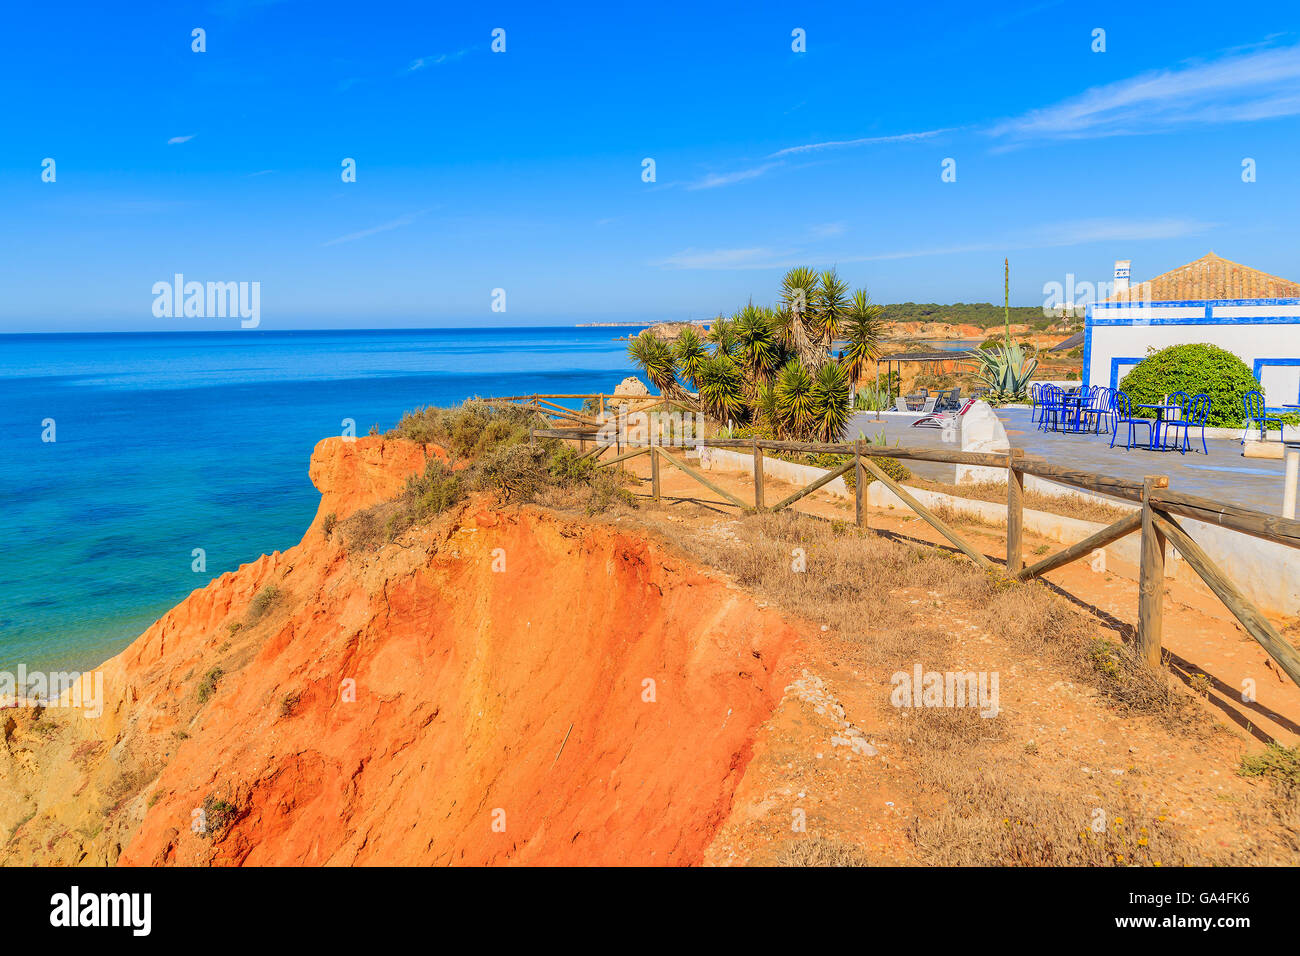 Typical house on top of cliff in Portimao seaside town, Algarve region, Portugal Stock Photo